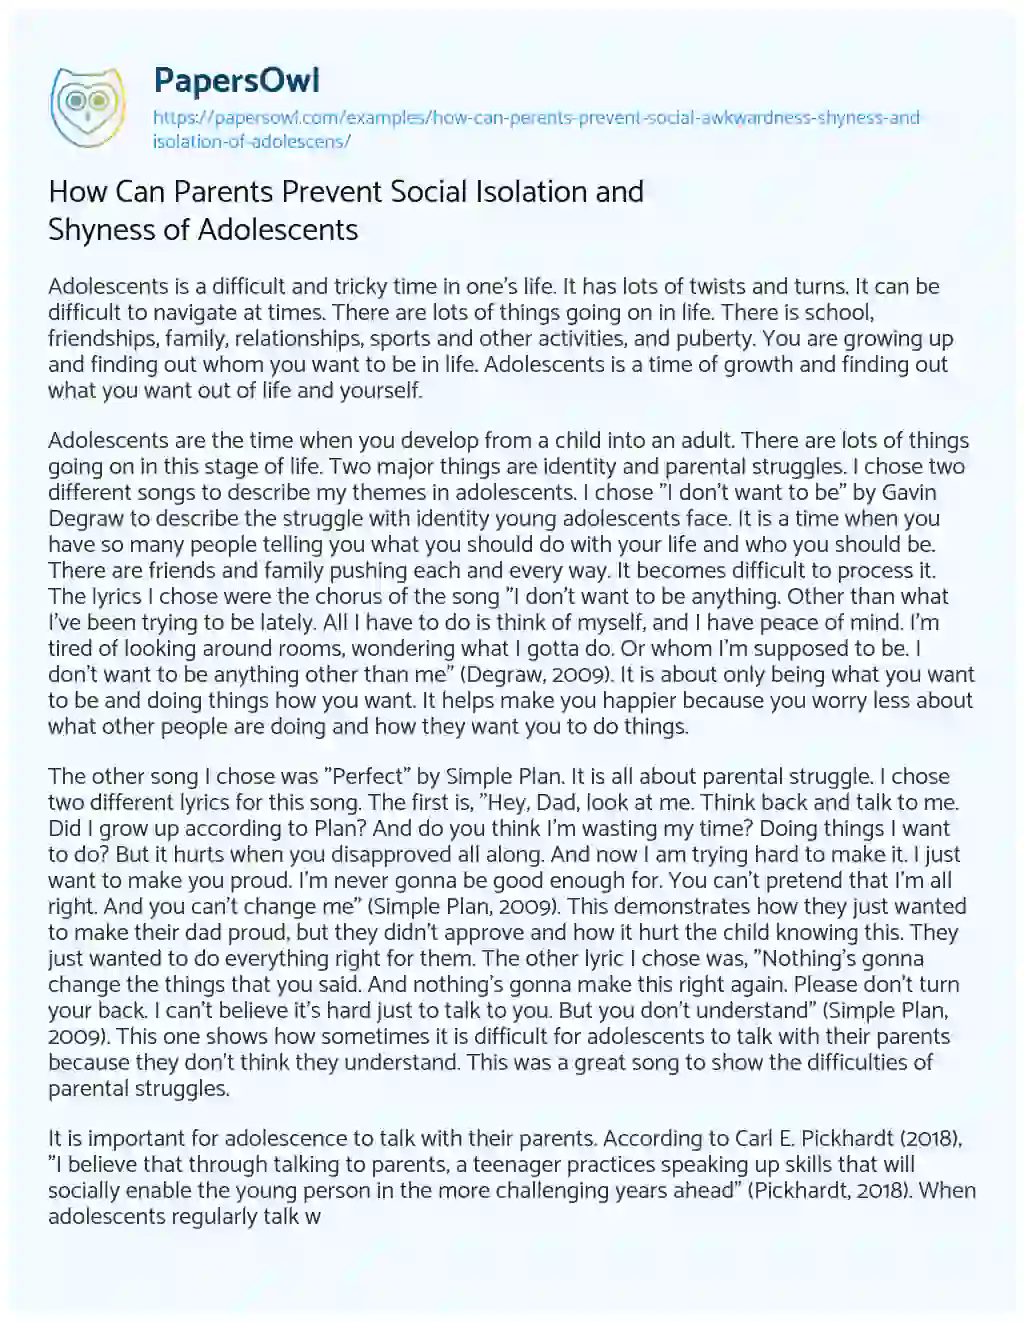 Essay on How Can Parents Prevent Social Isolation and Shyness of Adolescents